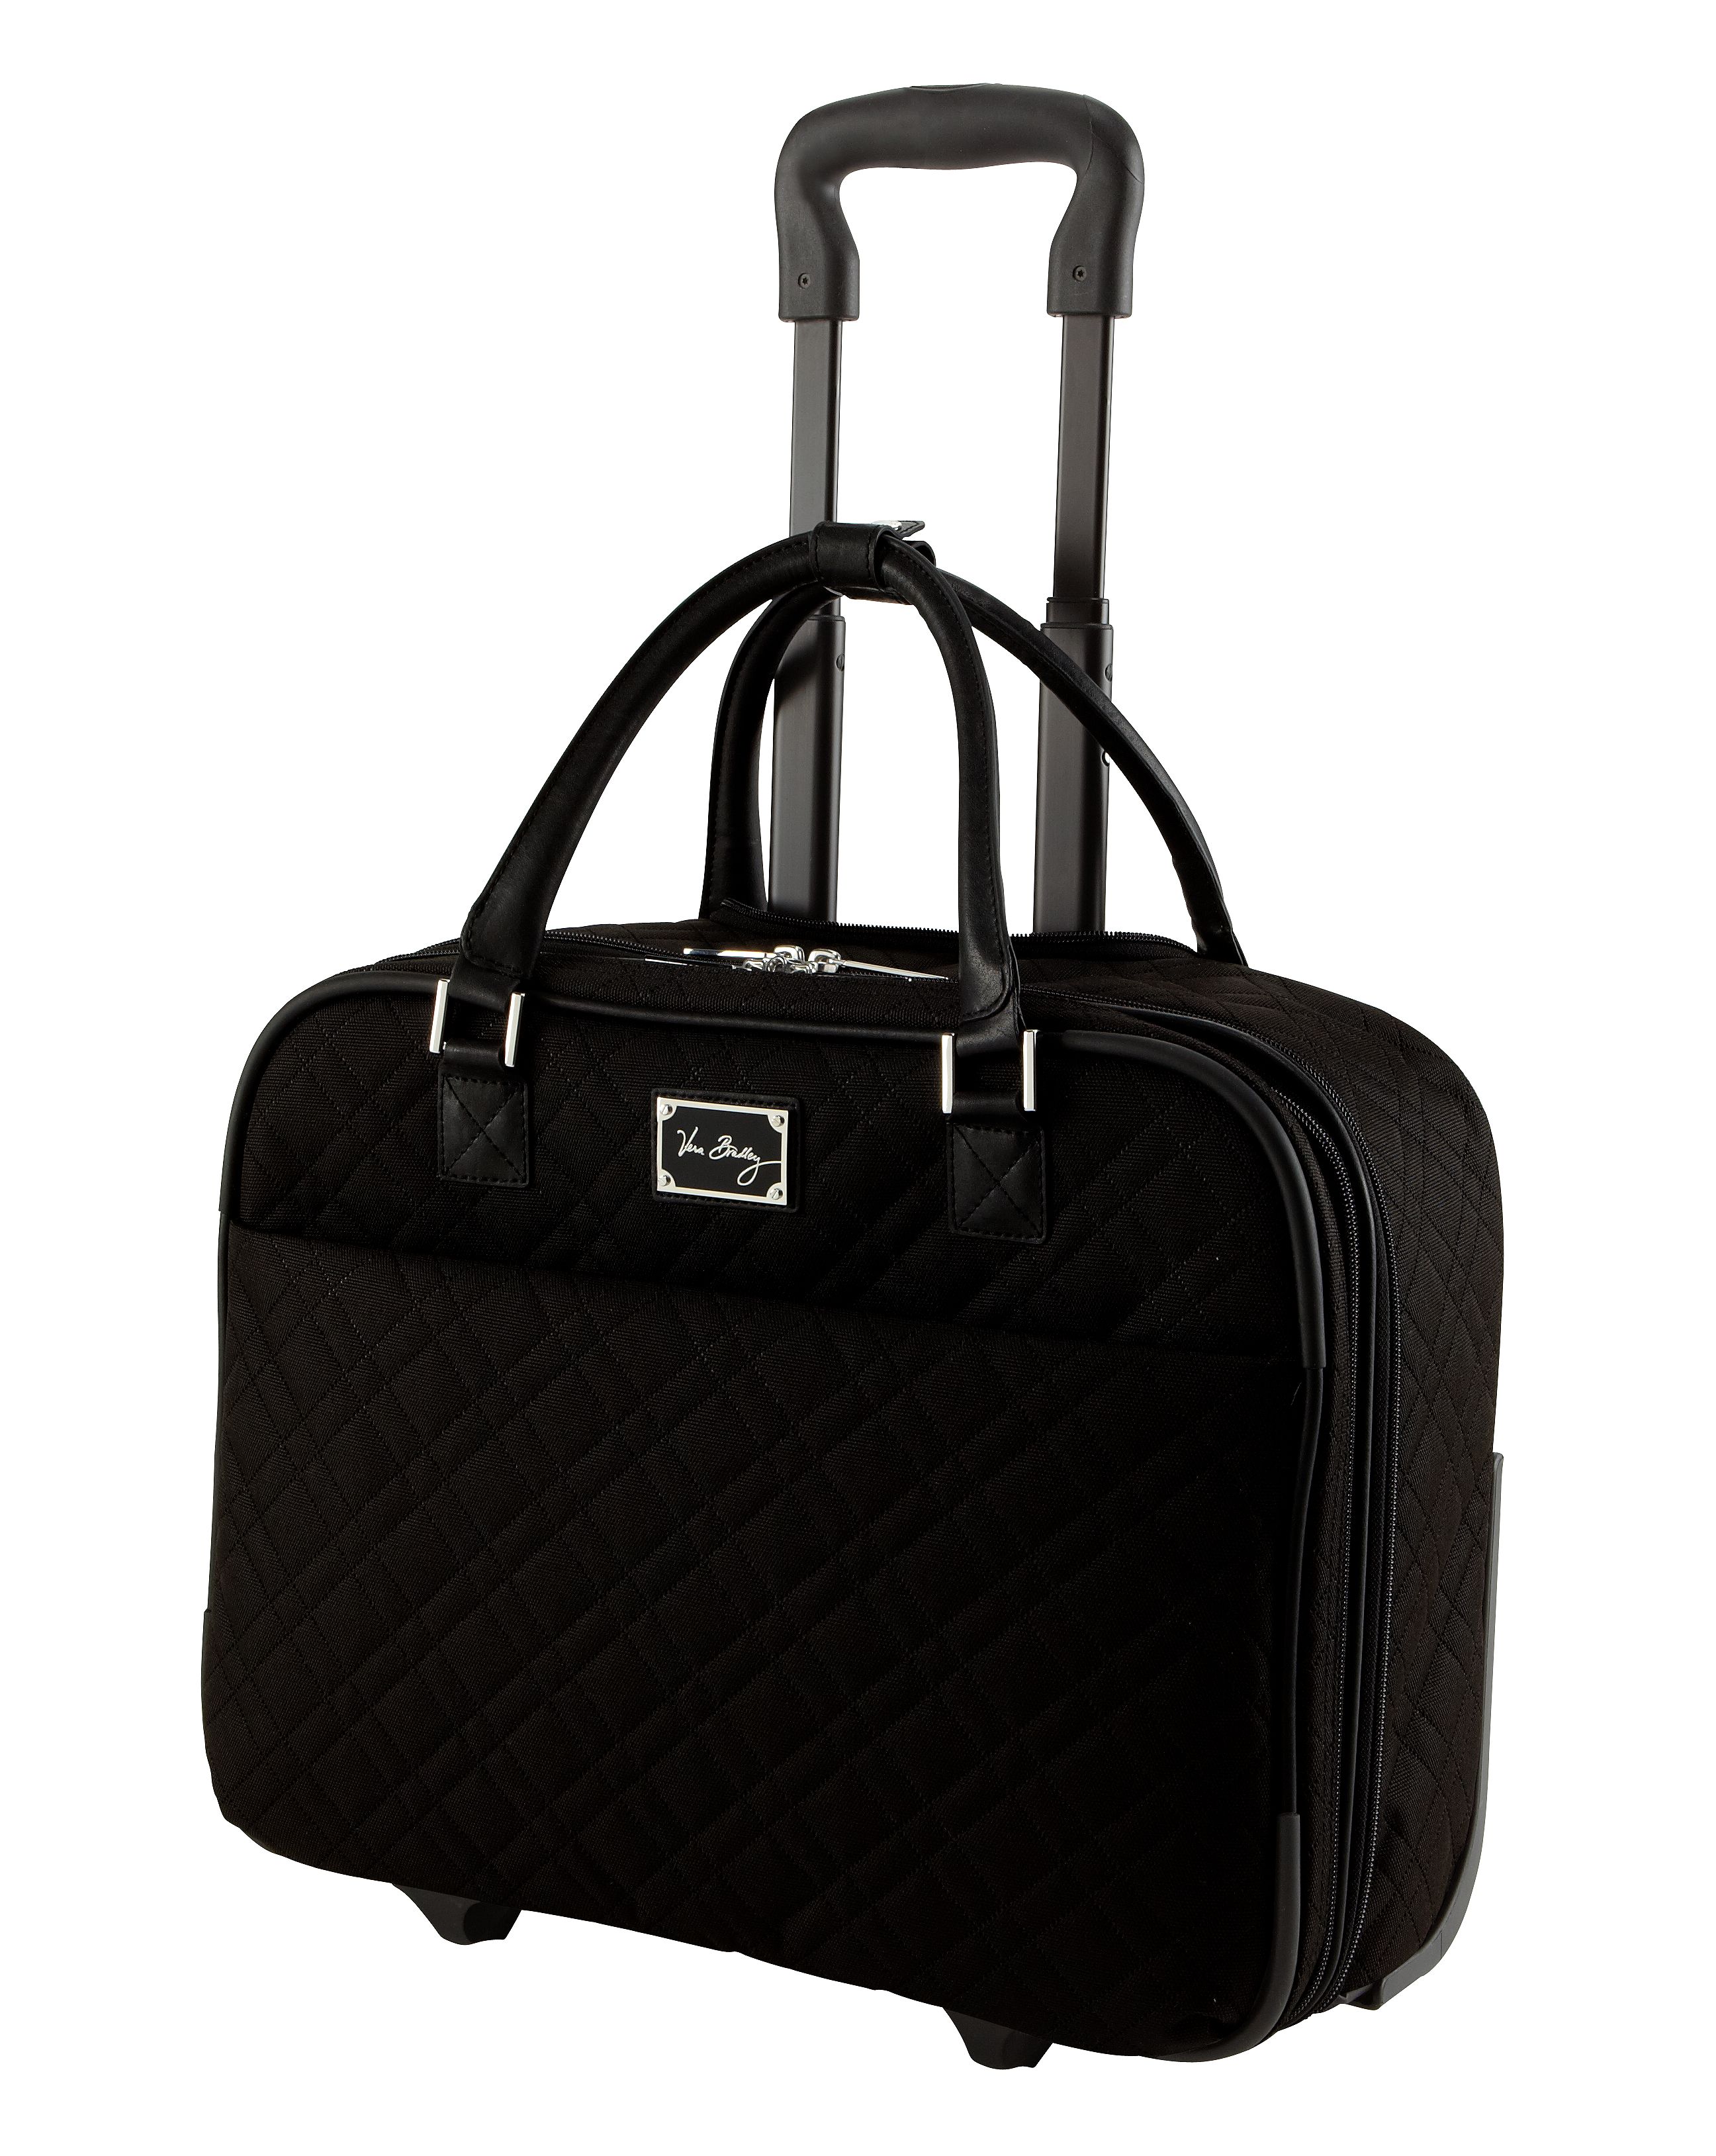 Roll Along Work Bag in Classic Black